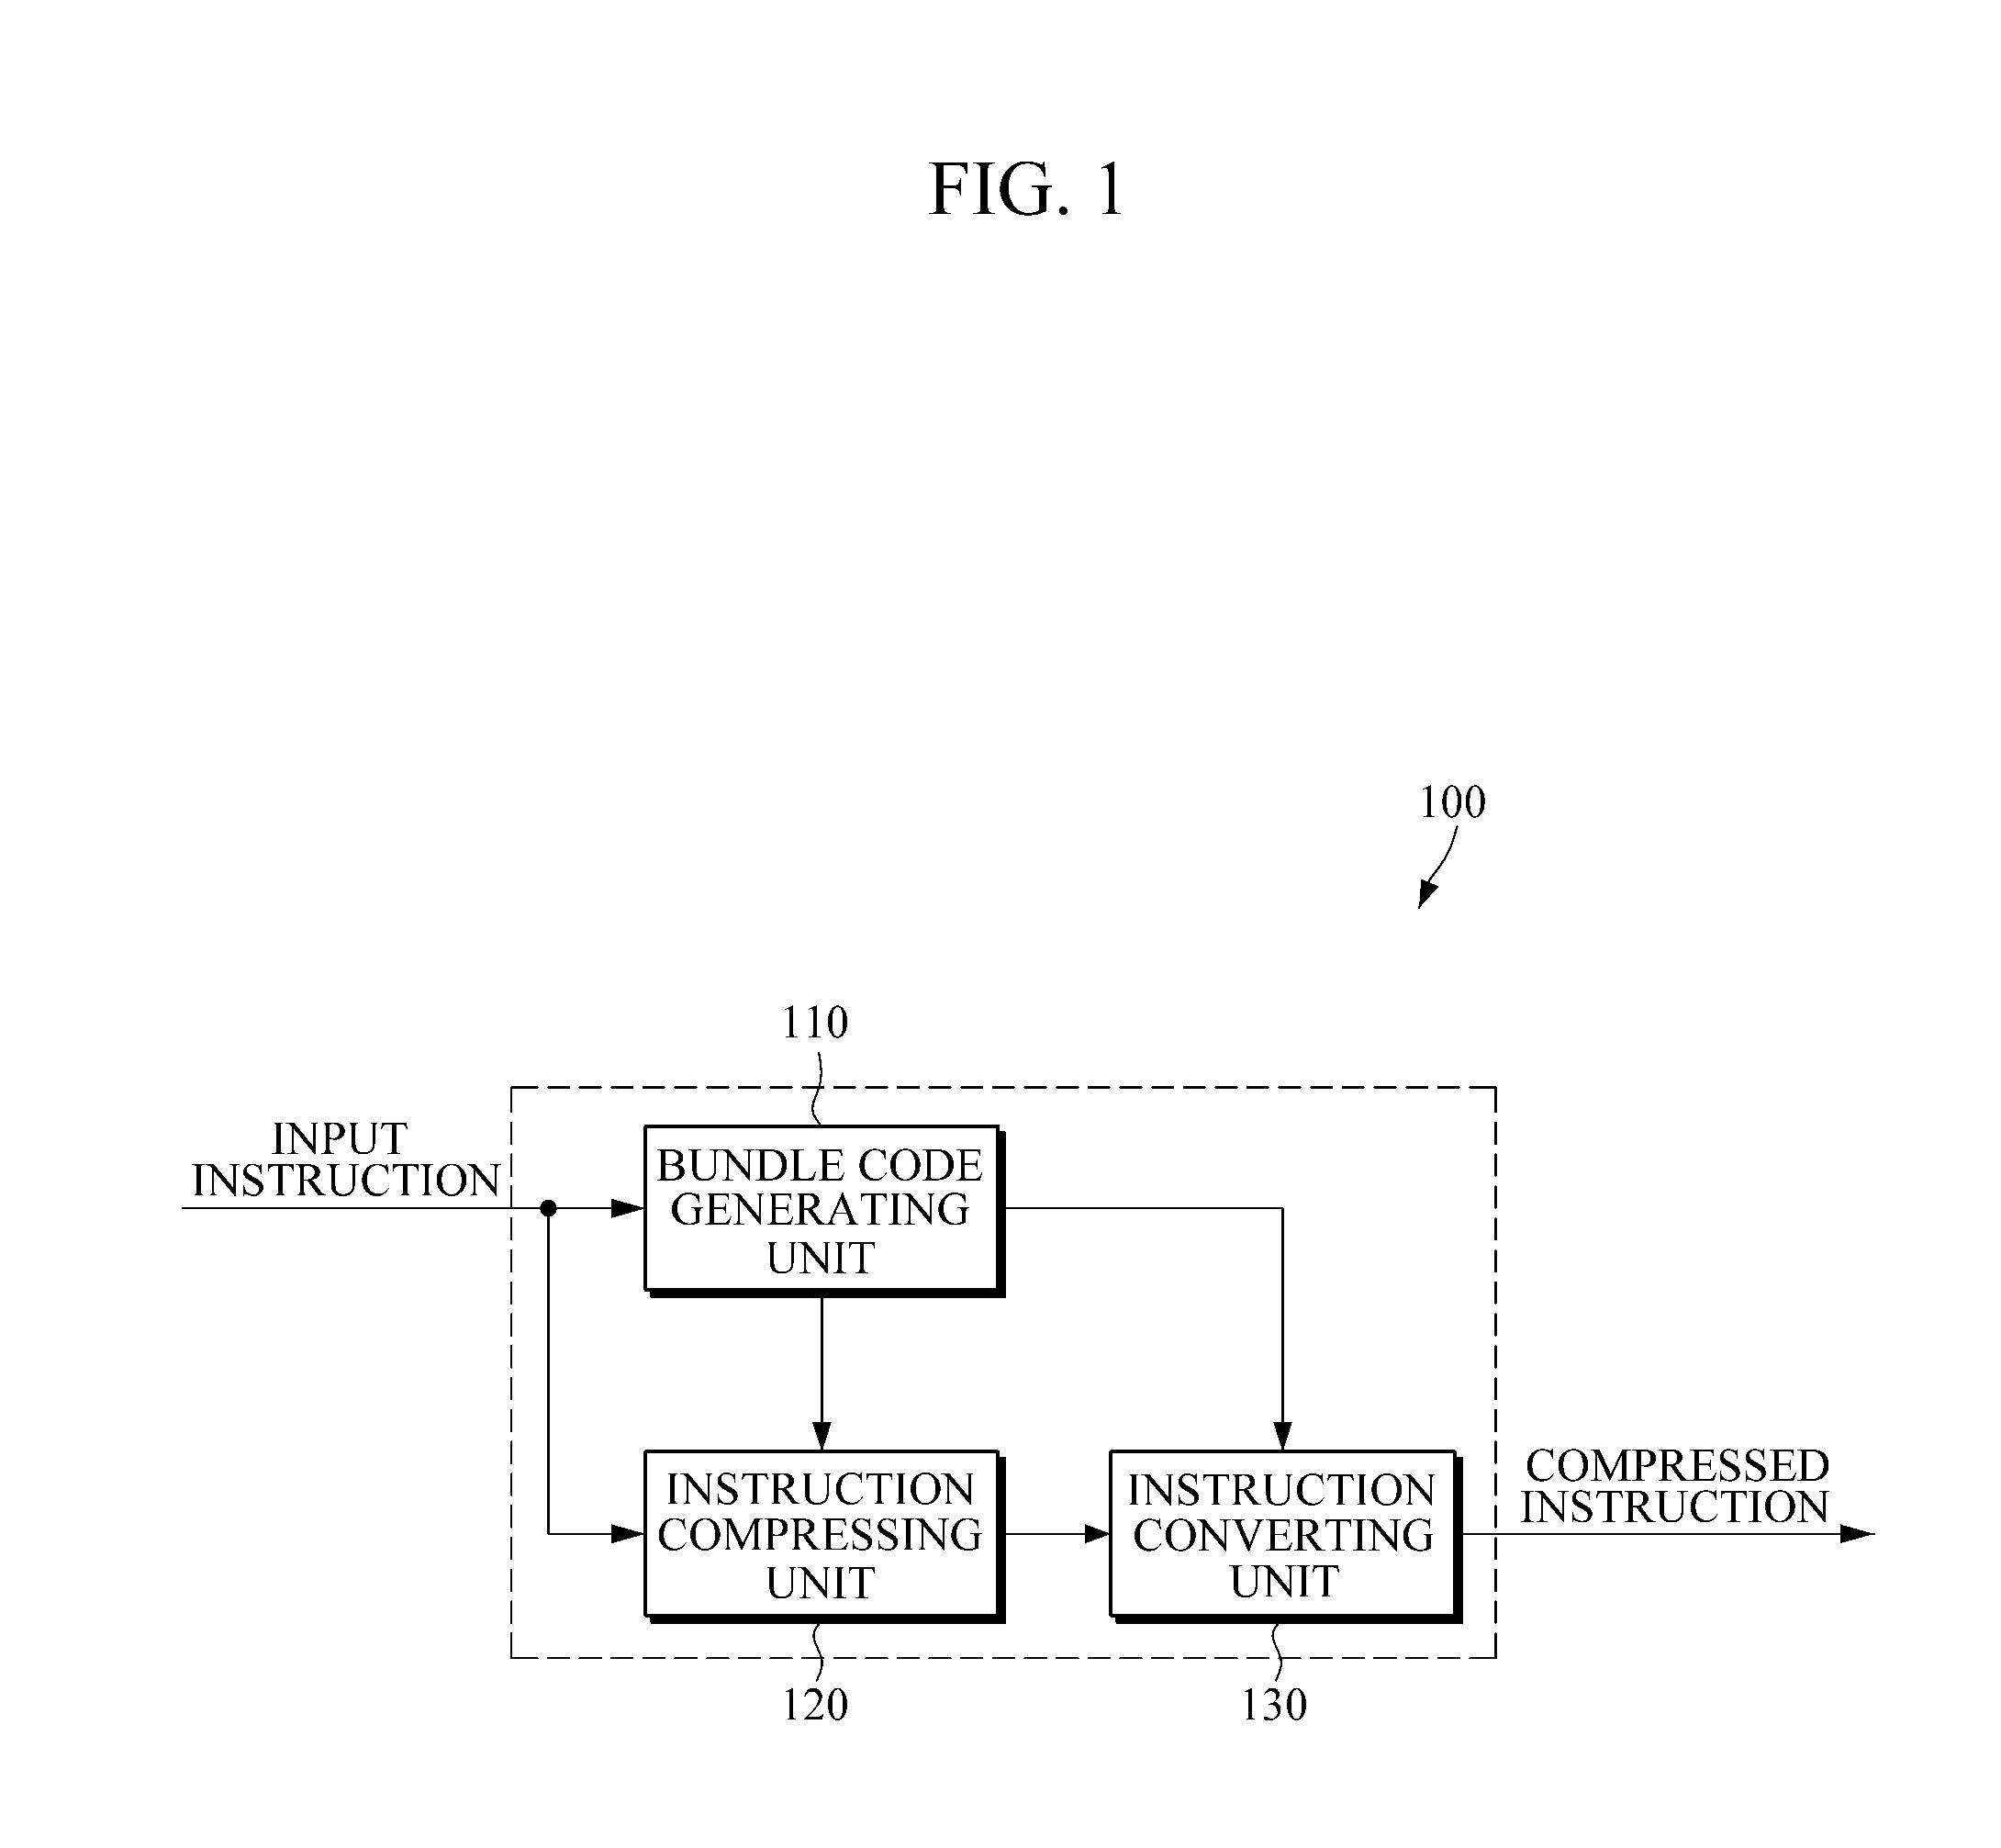 Instruction compressing apparatus and method